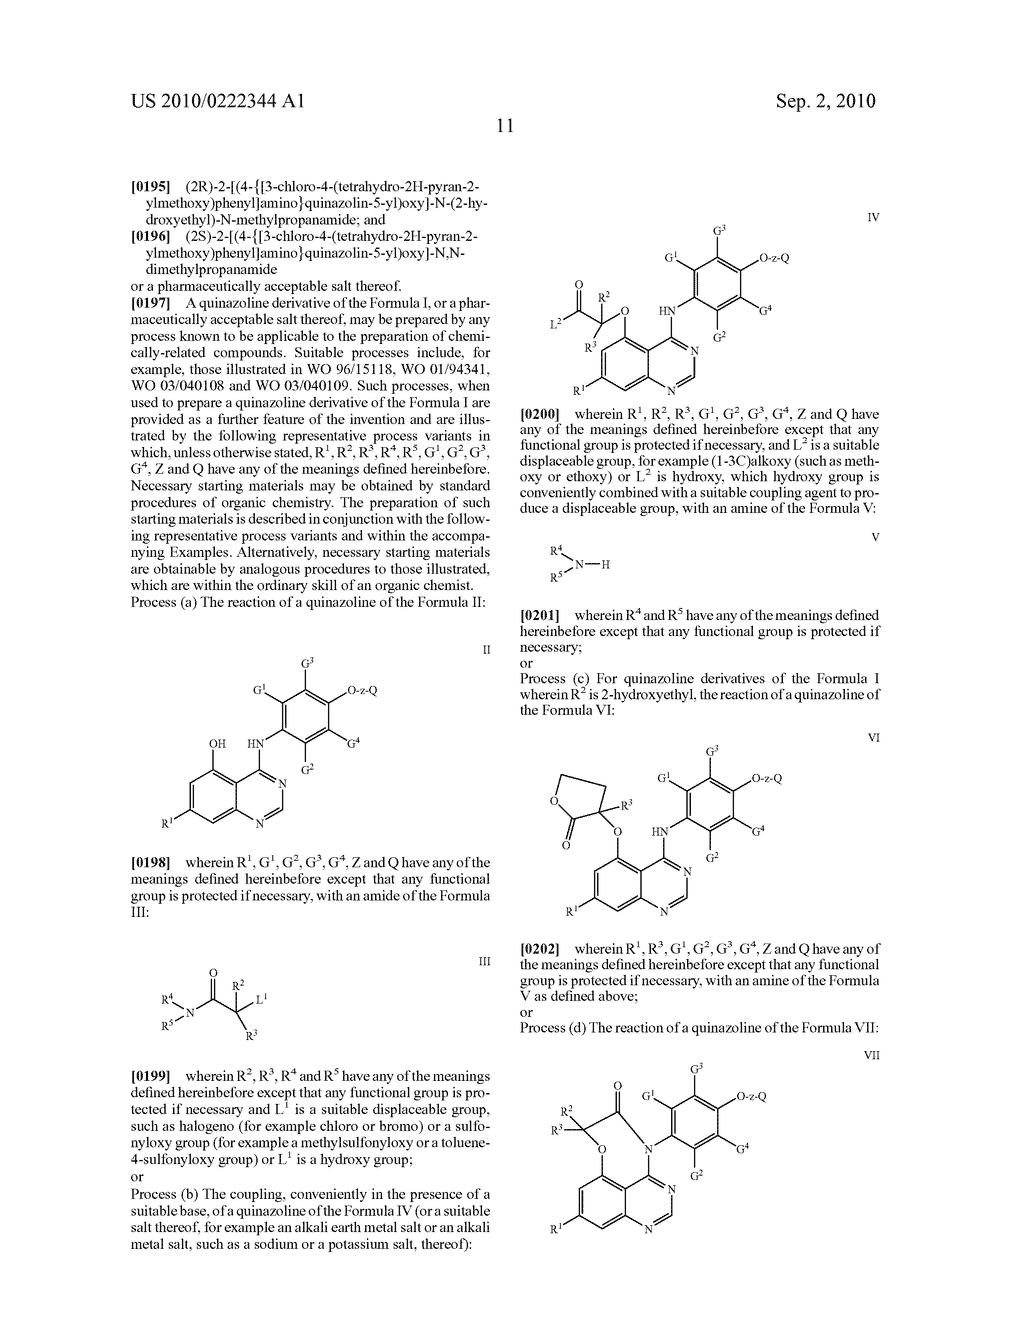 4-ANILINO-SUBSTITUTED QUINAZOLINE DERIVATIVES AS TYROSINE KINASE INHIBITORS - diagram, schematic, and image 12